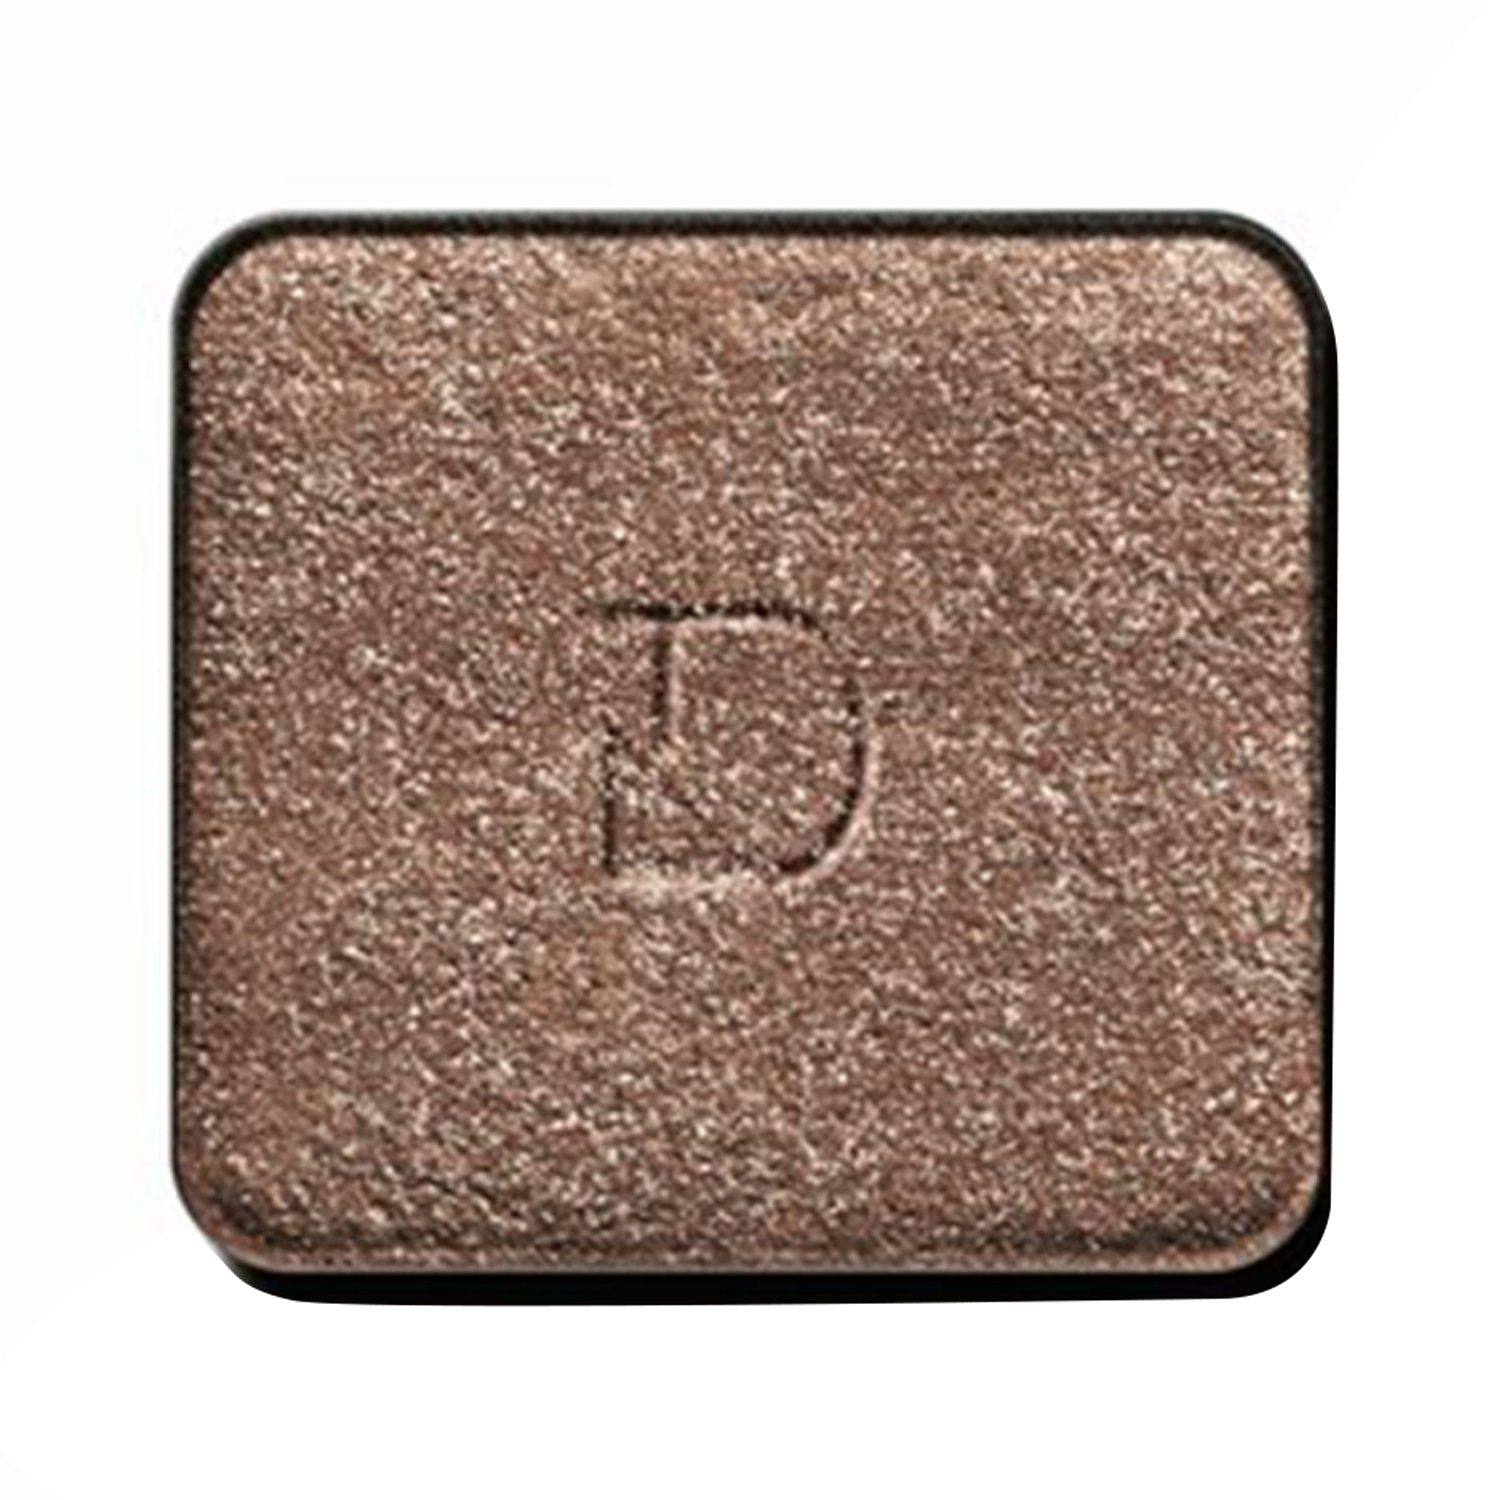 Diego Dalla Palma Milano | Diego Dalla Palma Milano Pearly Eyeshadow - Shiny Taupe (2g)